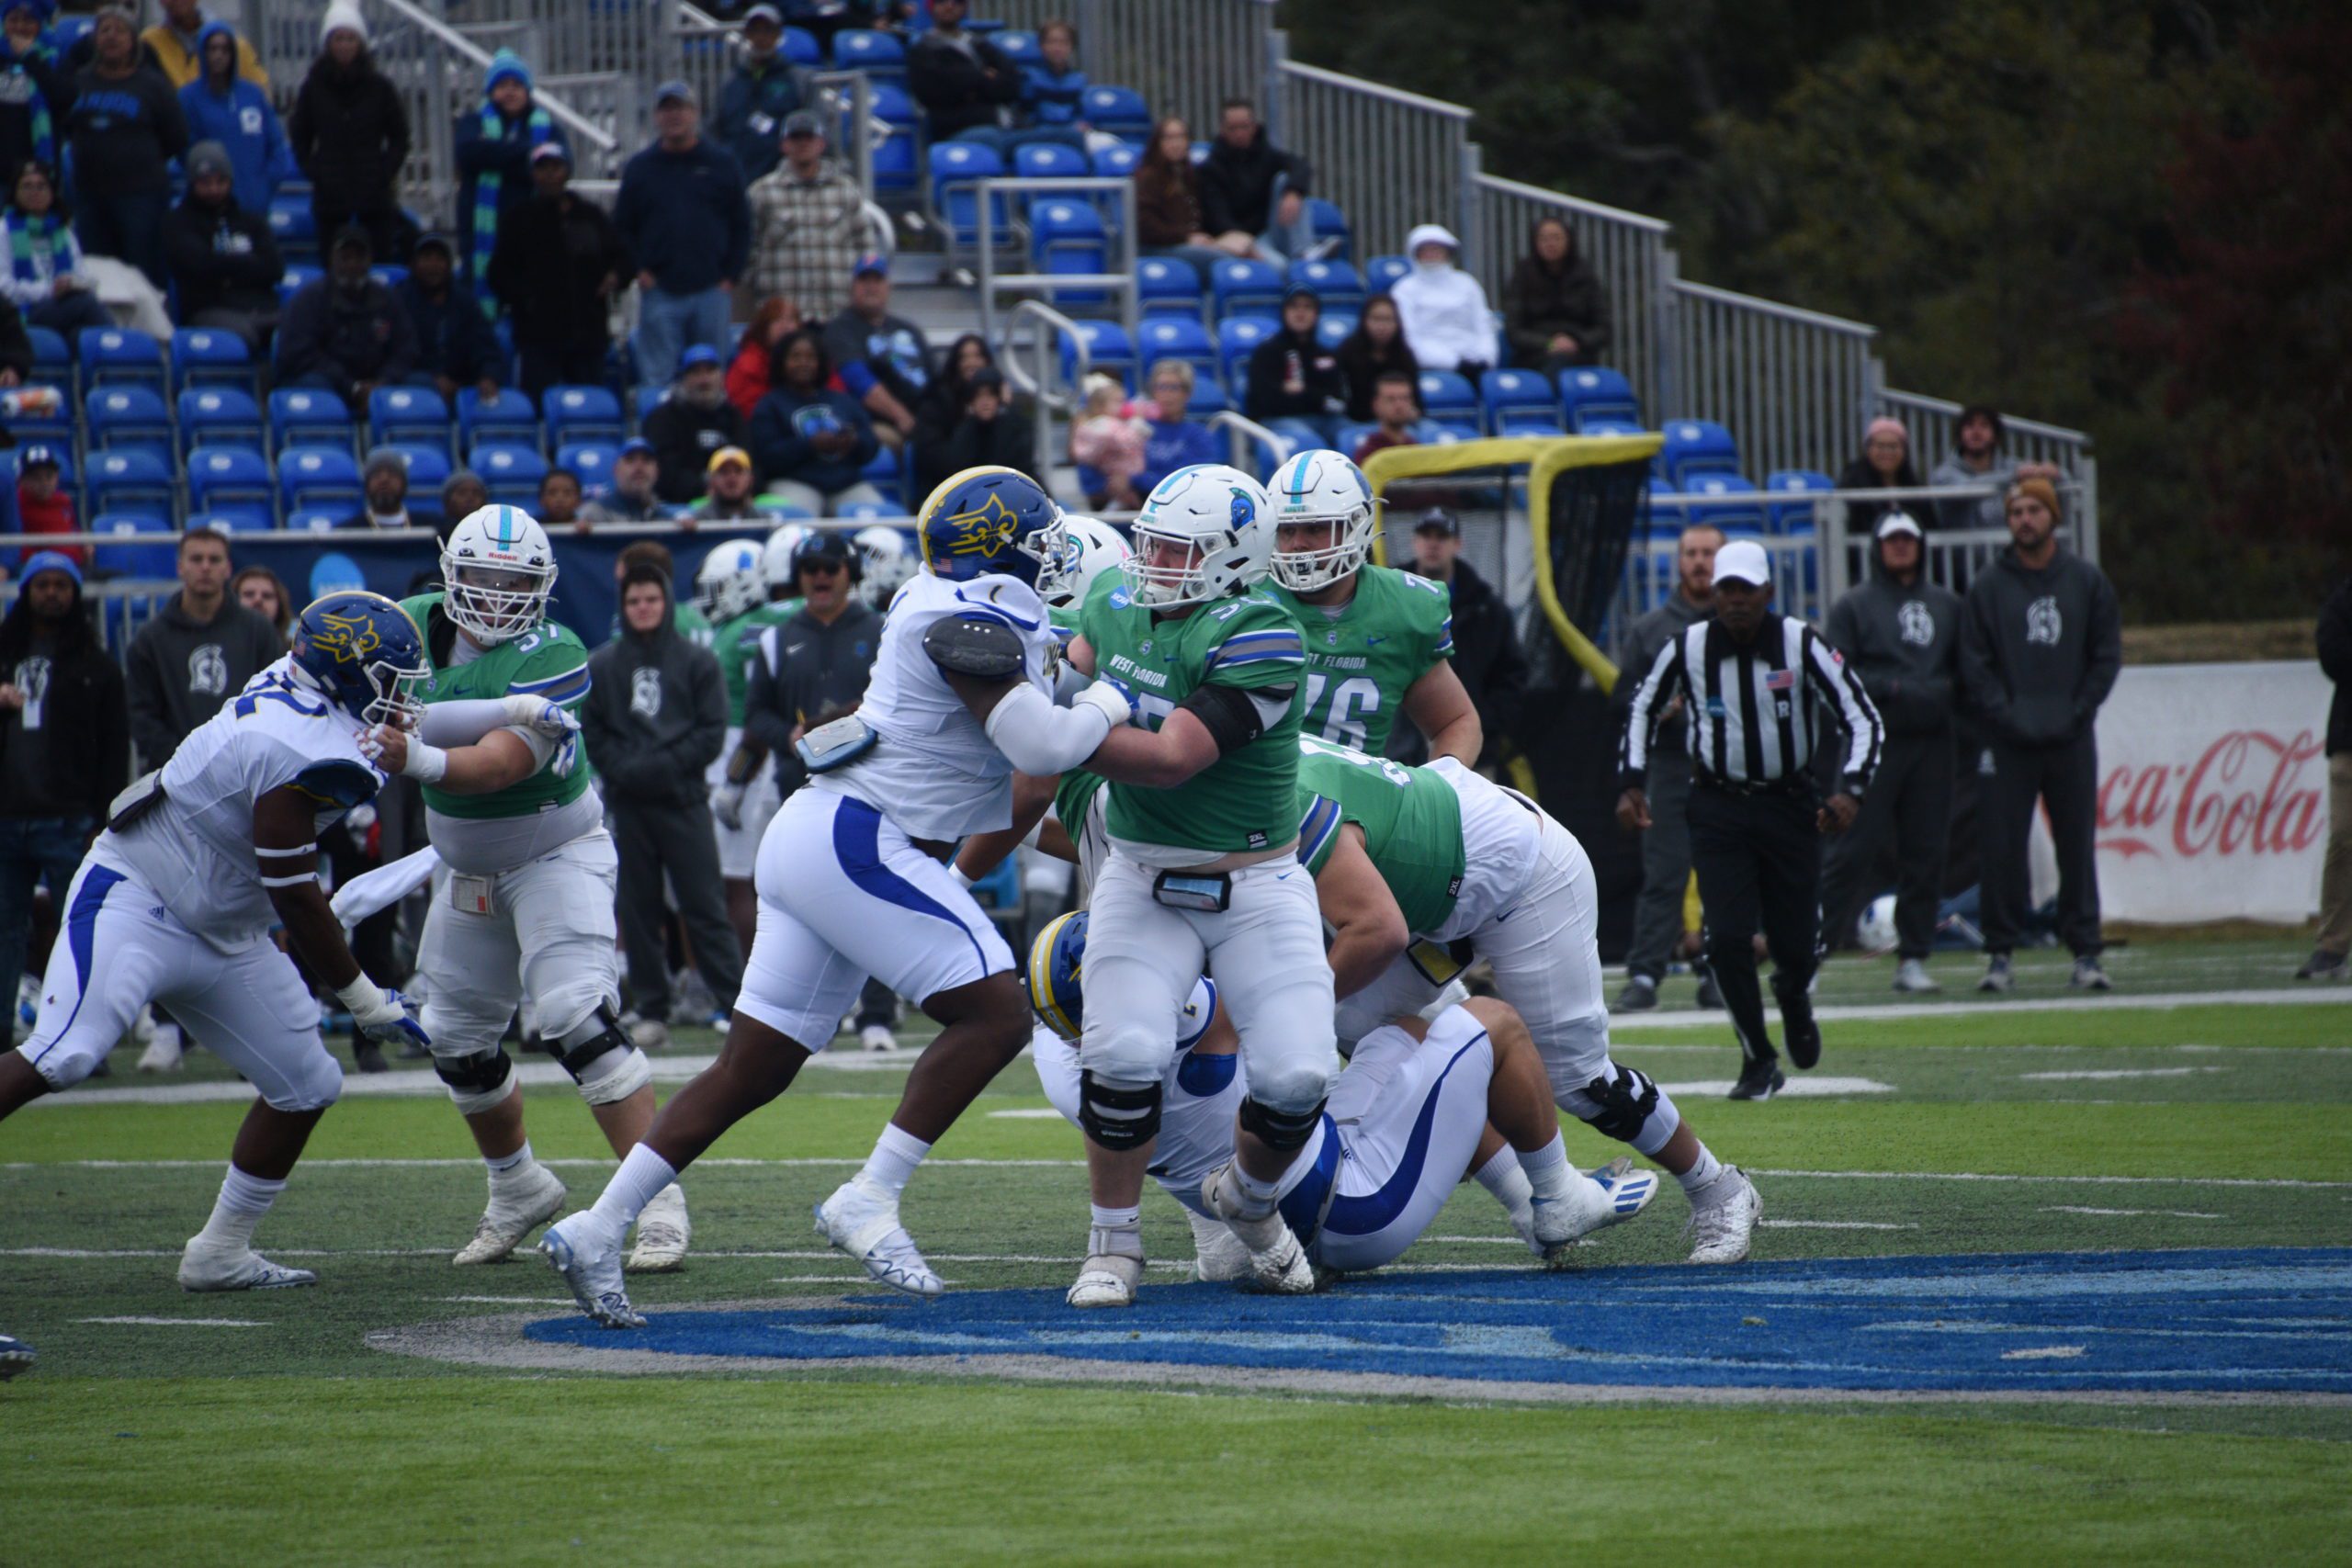 Game against D-I opponent highlights 2023 UWF football schedule | Navarre Press